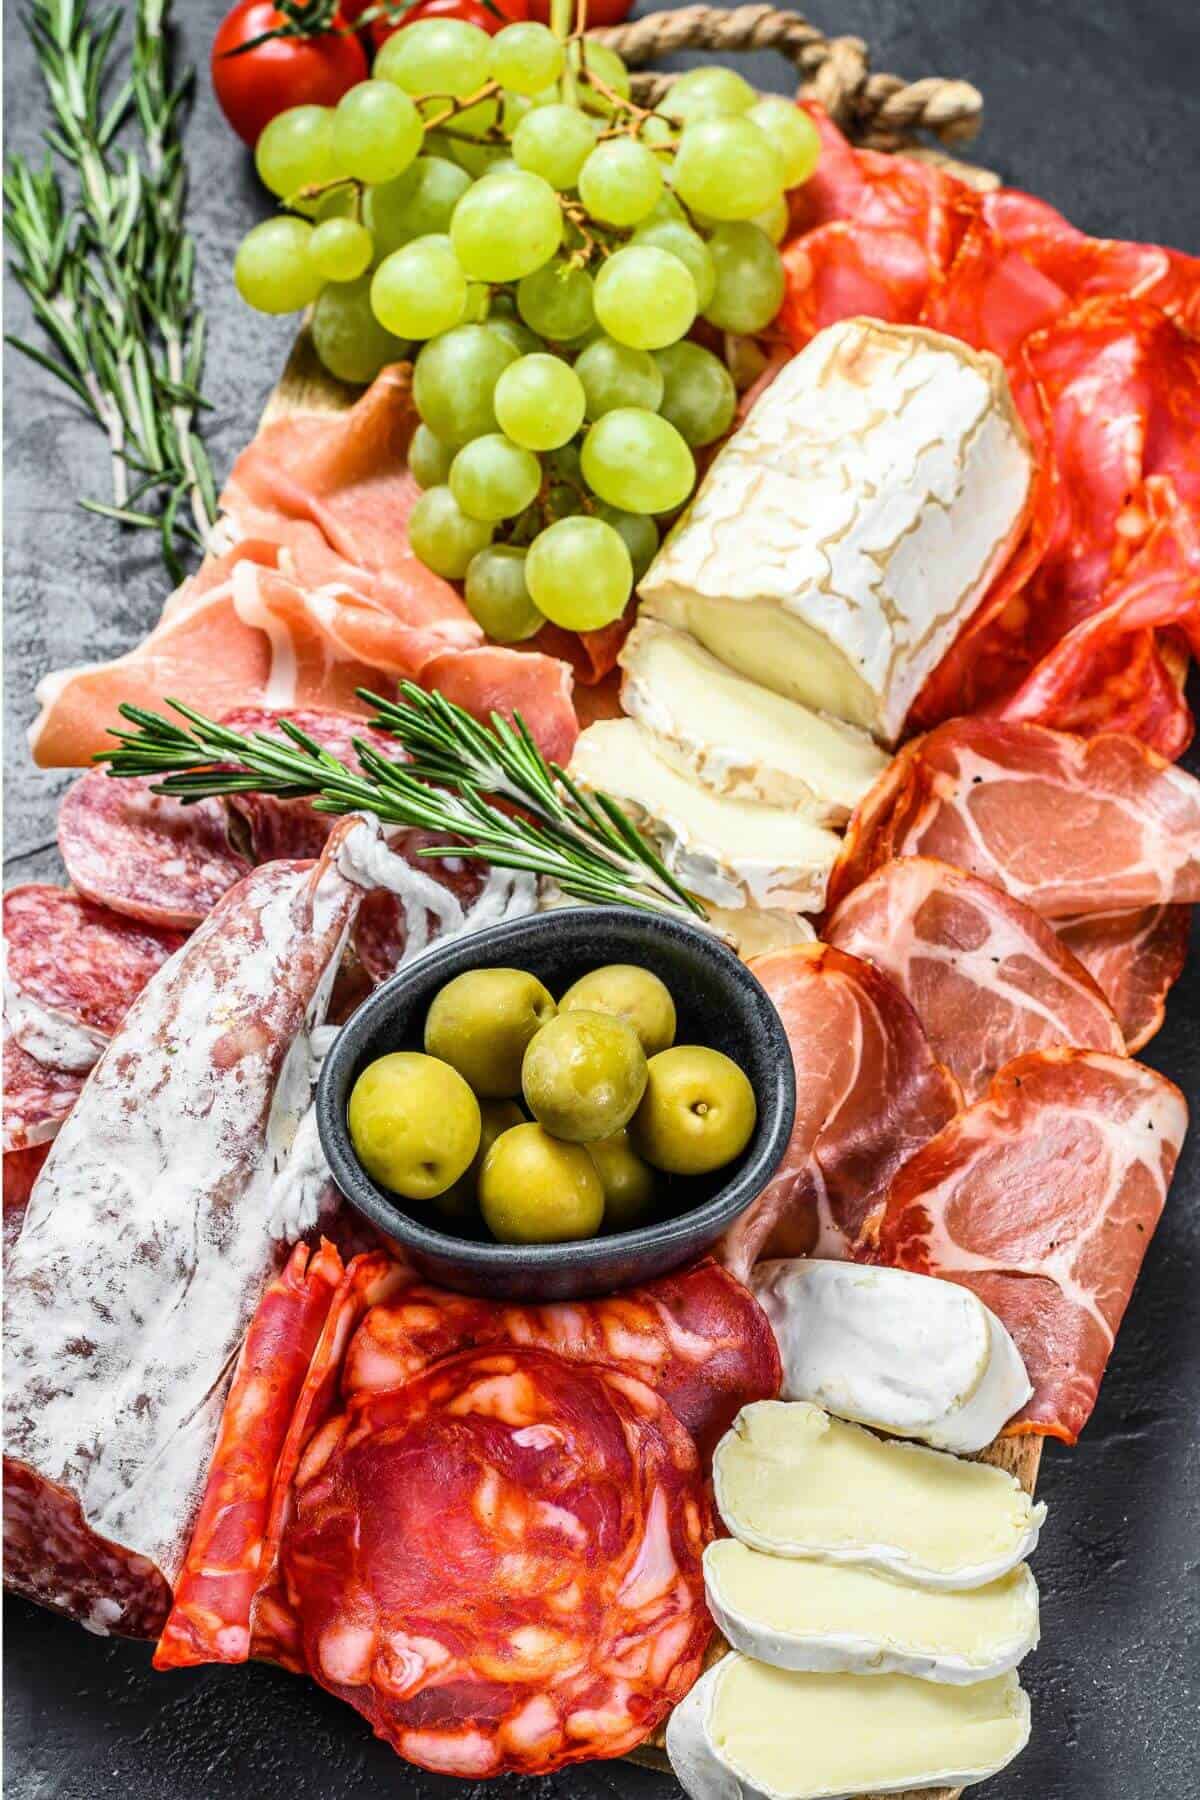 Charcuterie board with meat, cheese, and fruit.